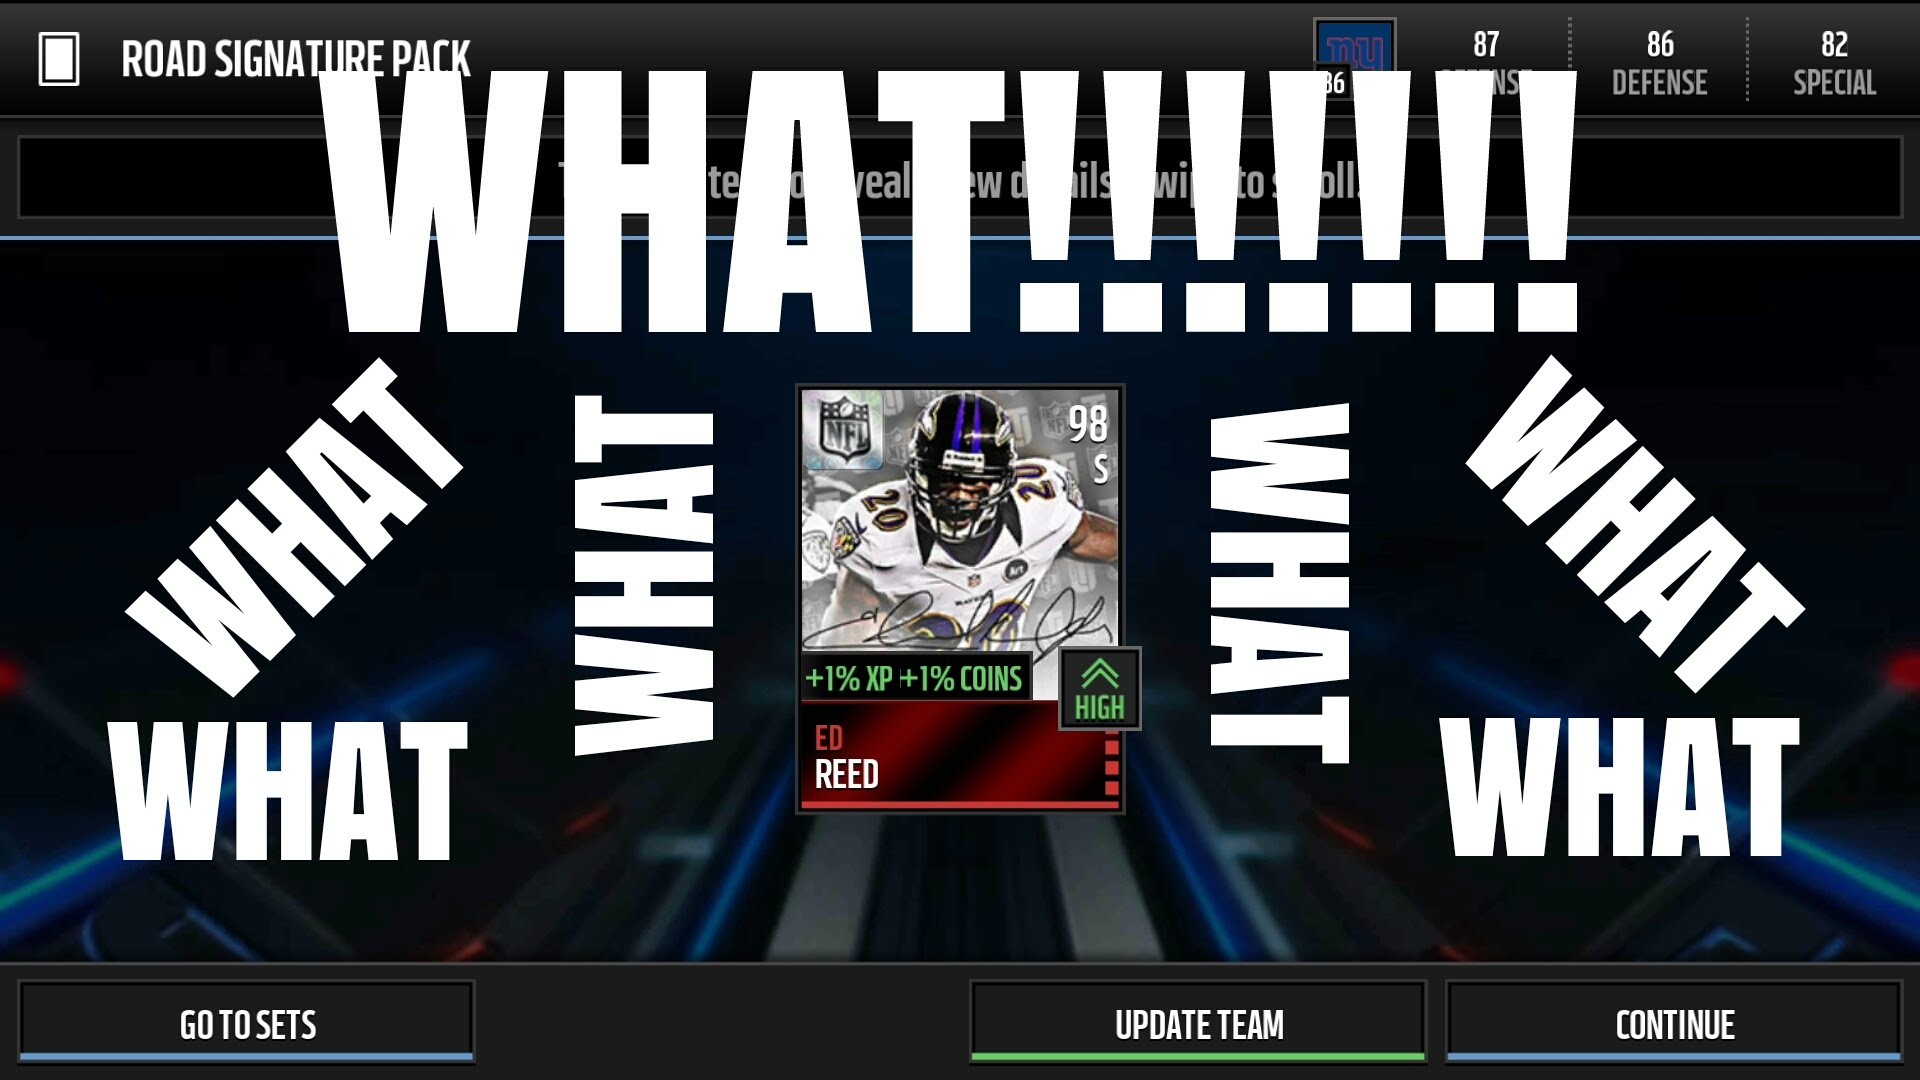 1920x1080 Did I really get ED REED!!!